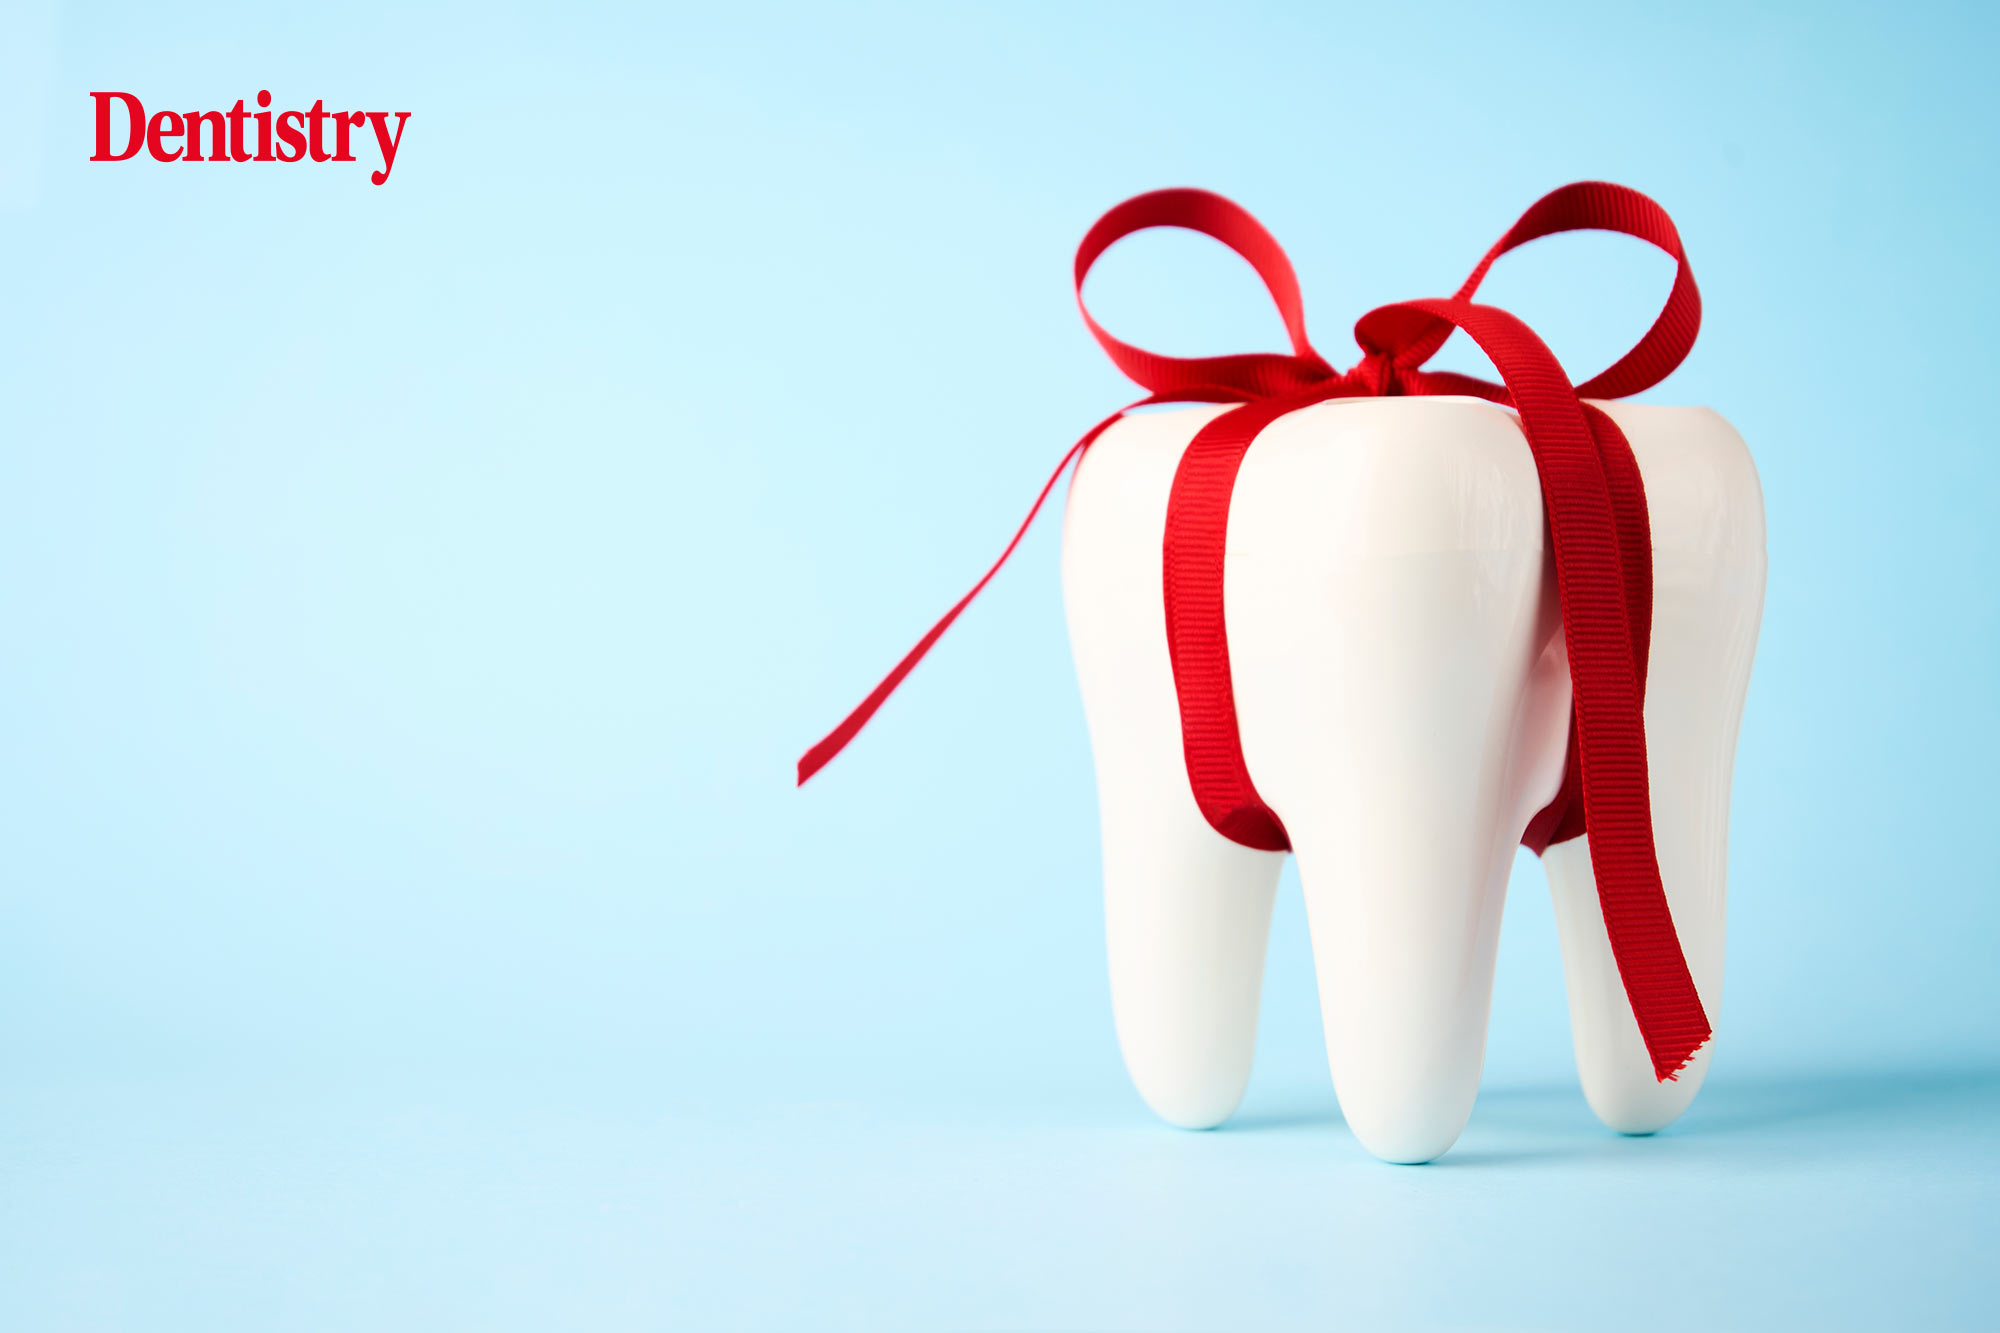 Nine in 10 dental professionals received gift from patient in last year, survey reveals